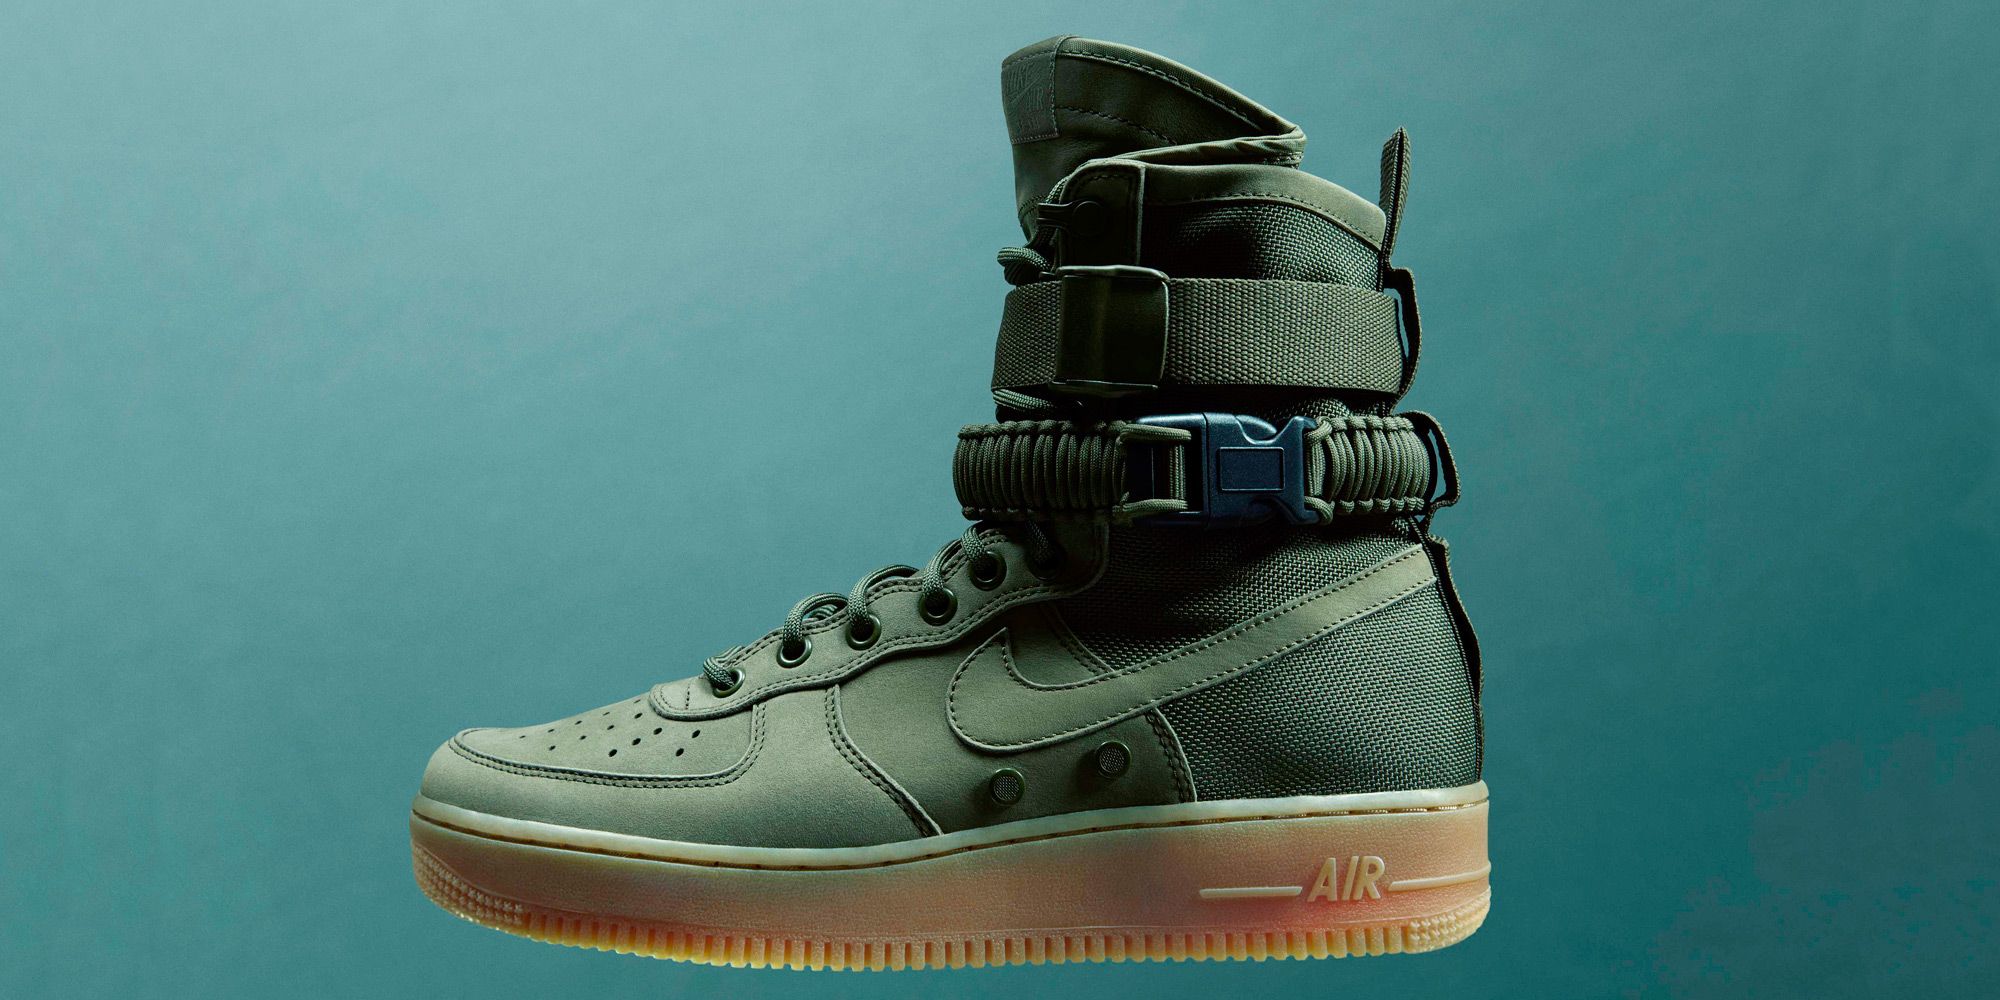 Convergeren Sandy Omdat Nike Just Dropped a Military-Inspired Air Force 1